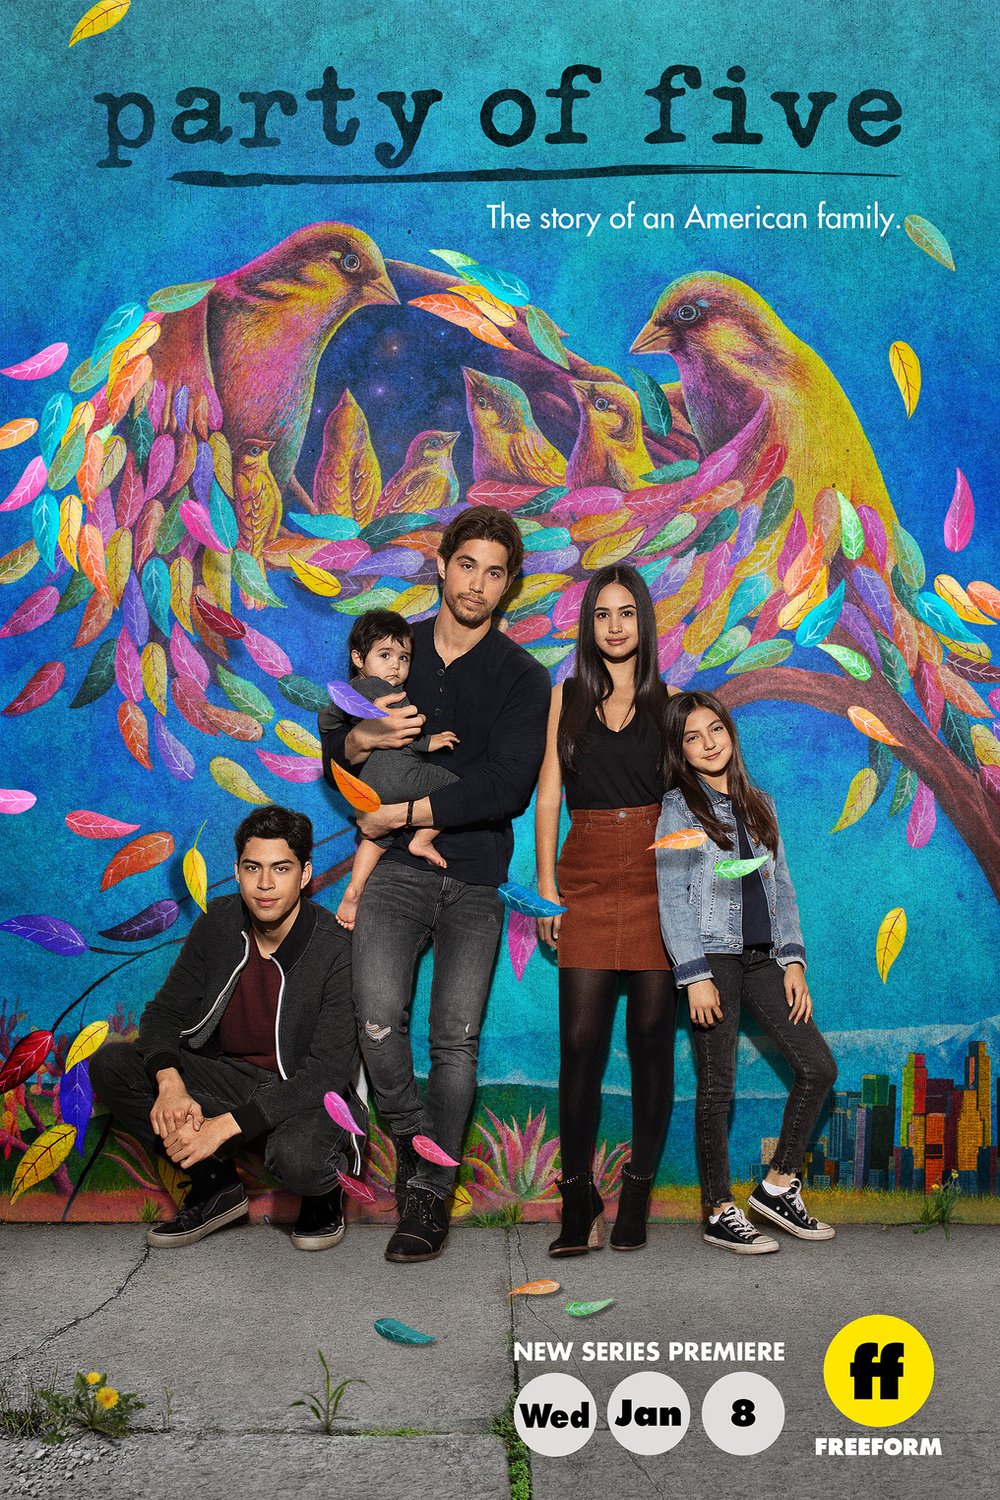 Poster of the movie Party of Five